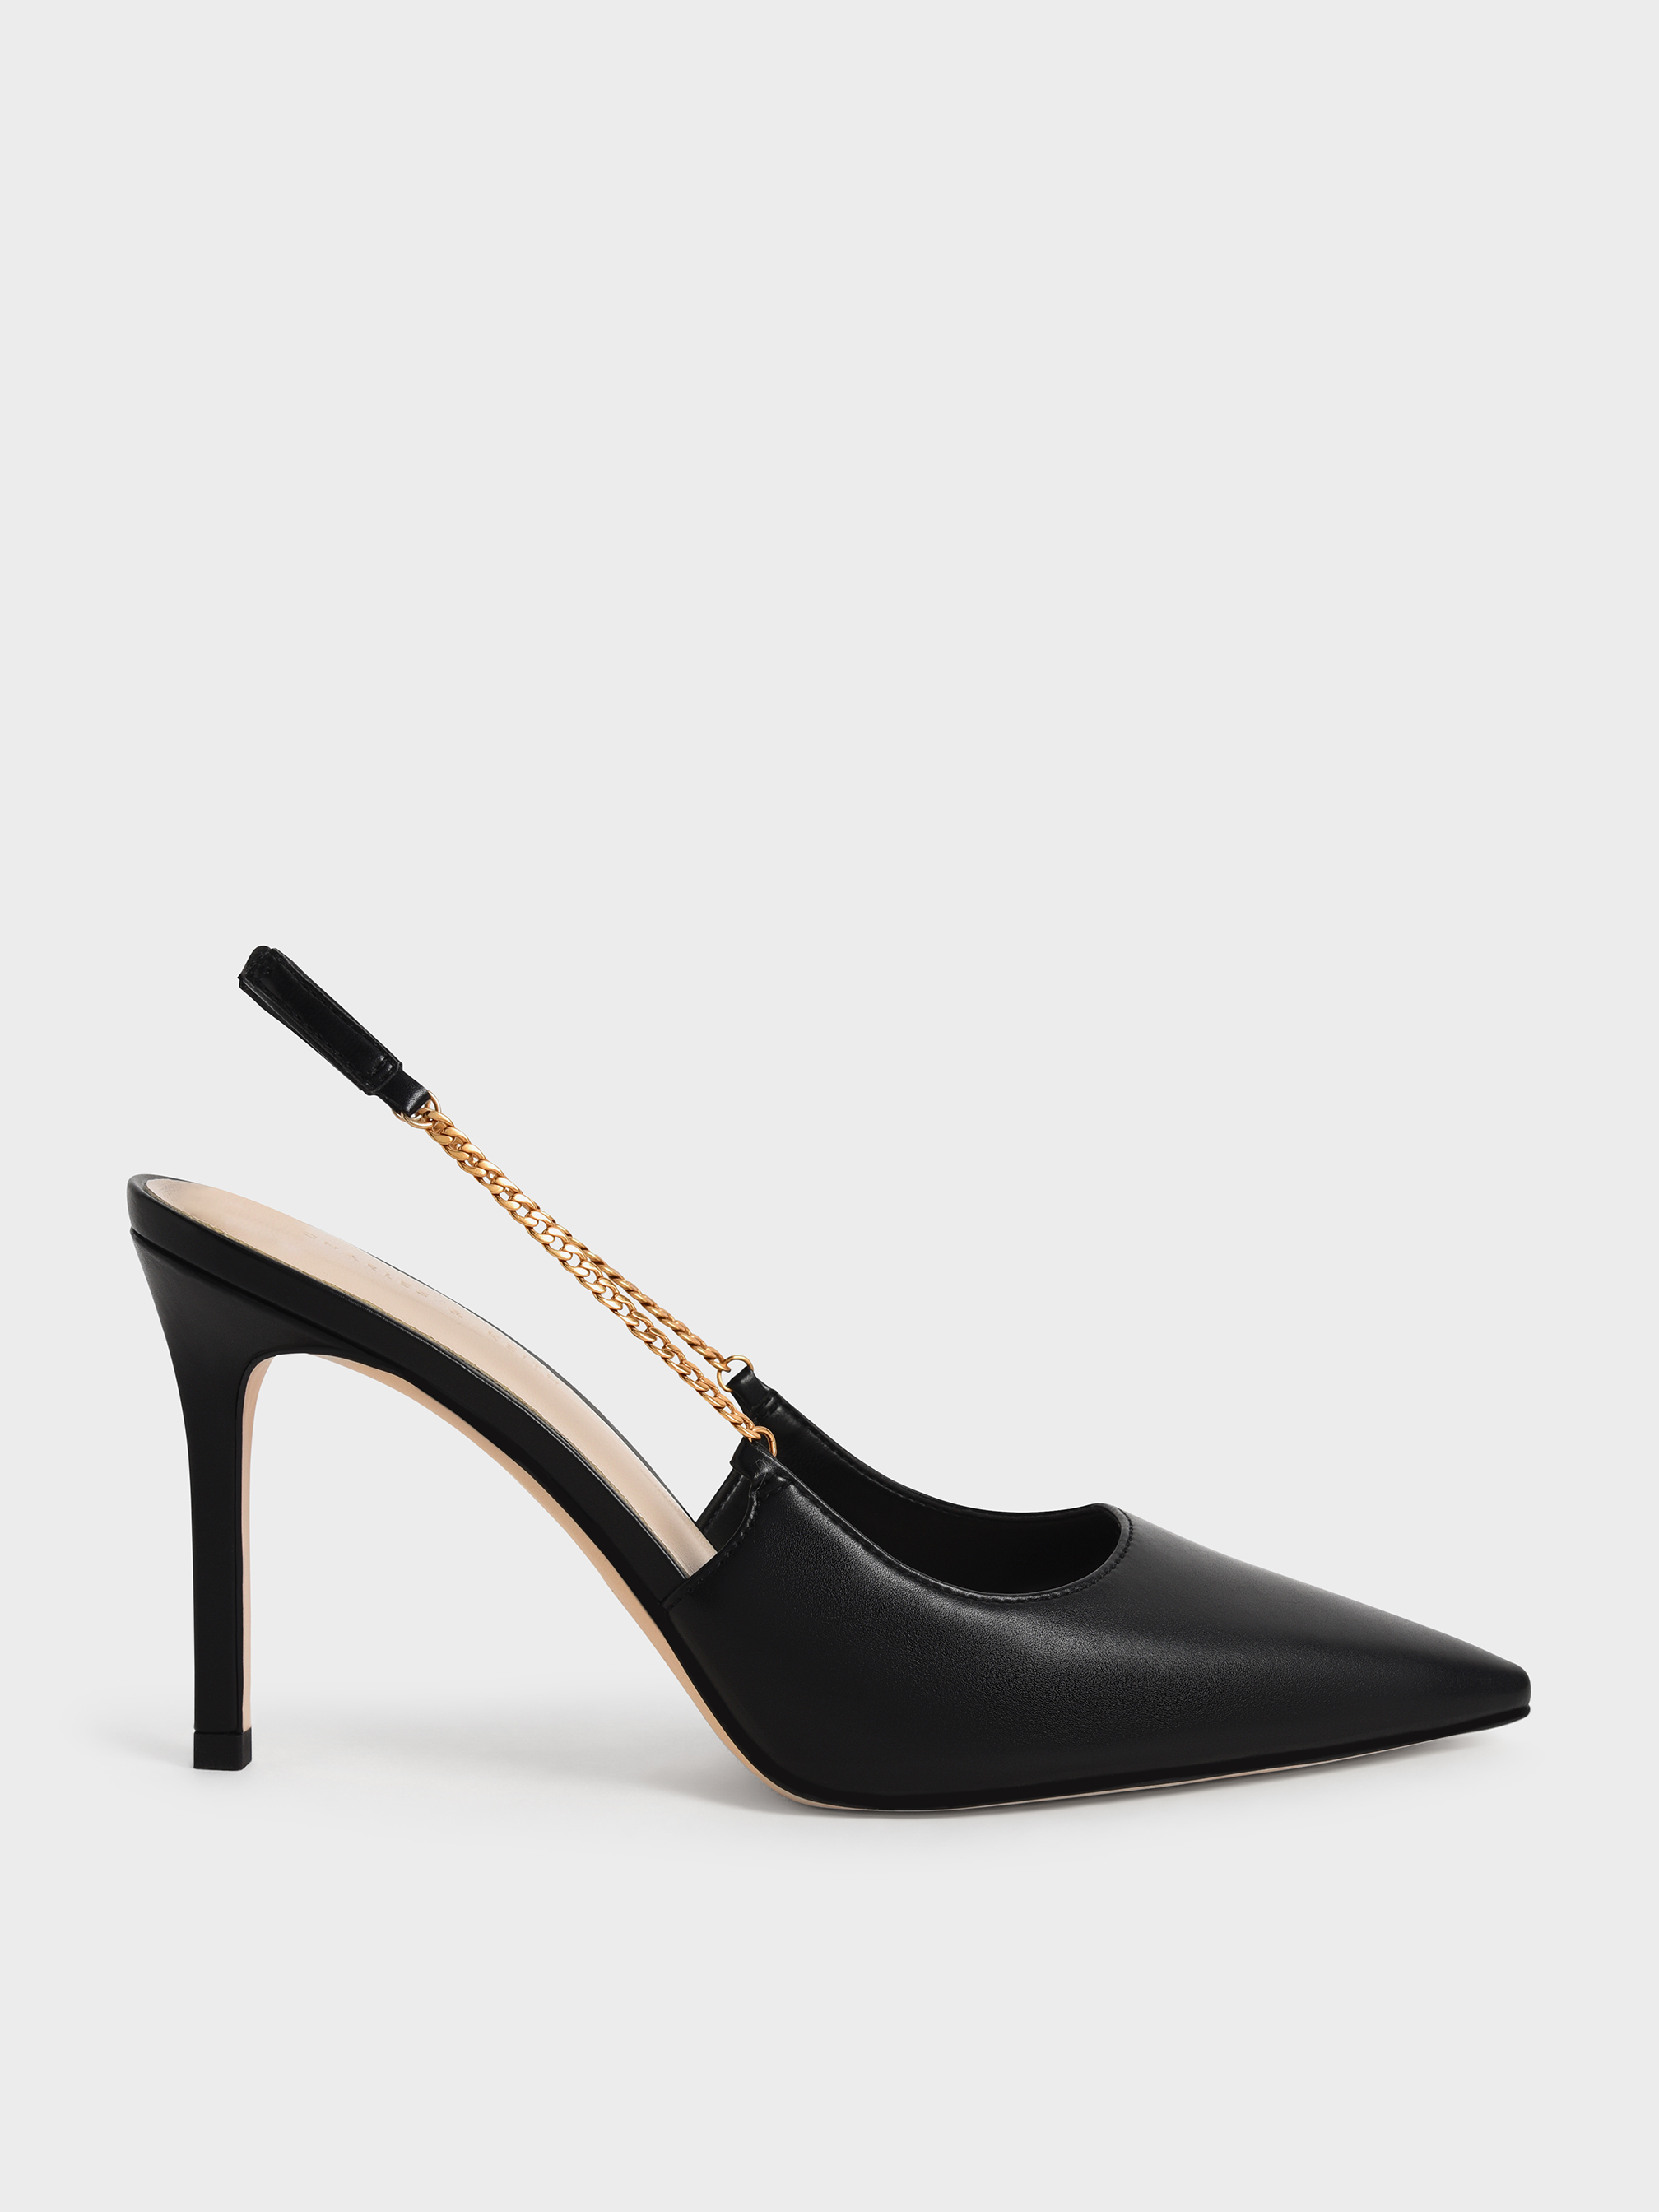 Black Chain-Link Slingback Stiletto Pumps - CHARLES & KEITH US